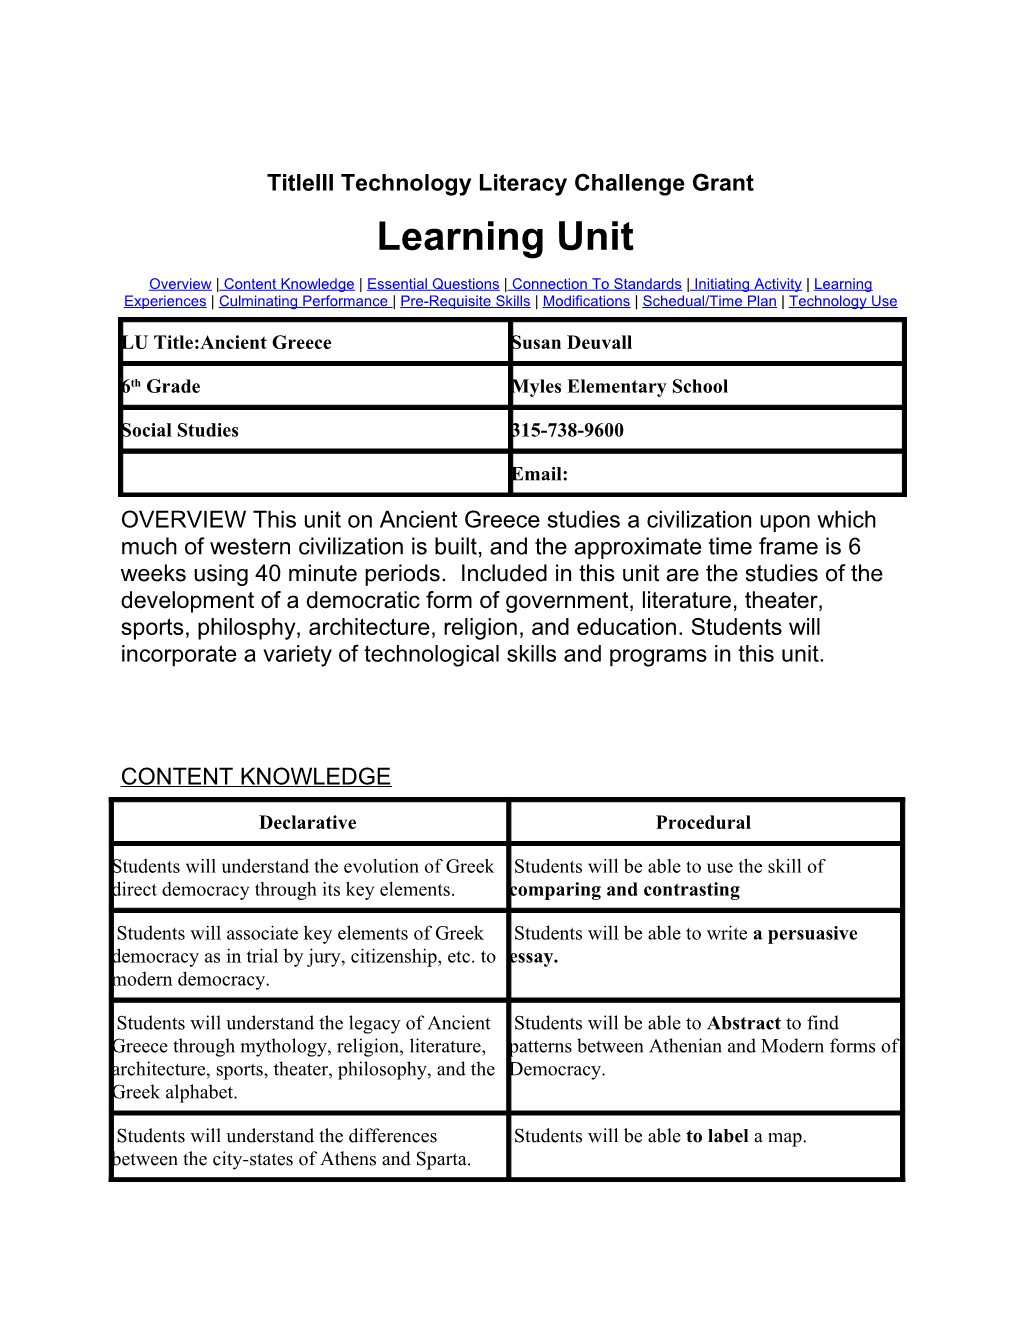 Learning Unit Title